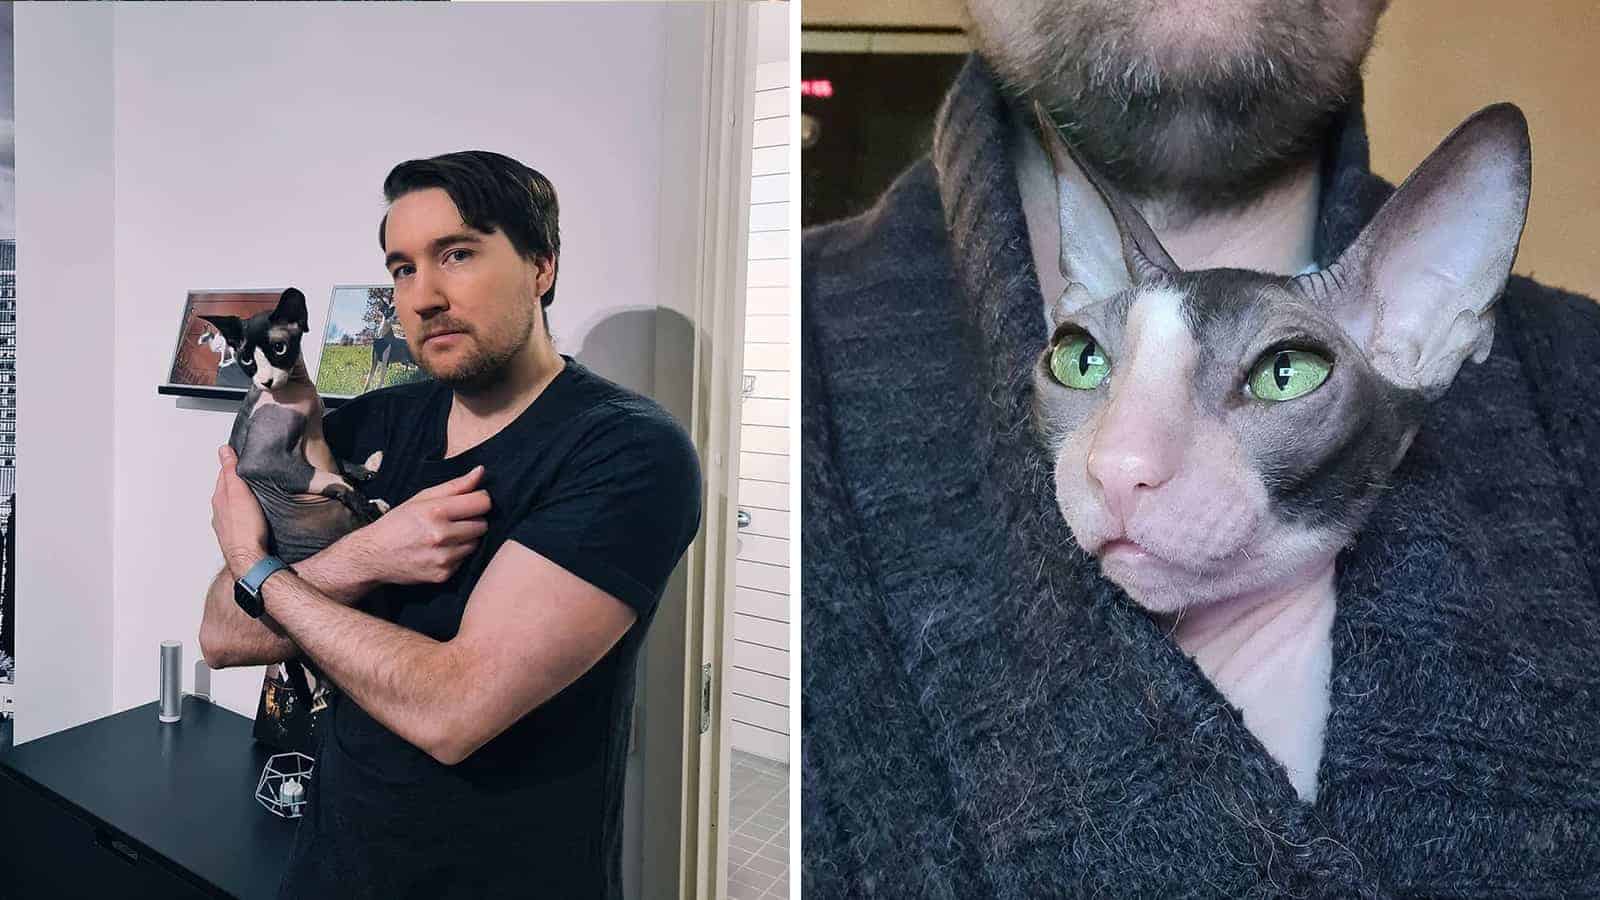 Man Overcomes Adversity with Therapy Cats